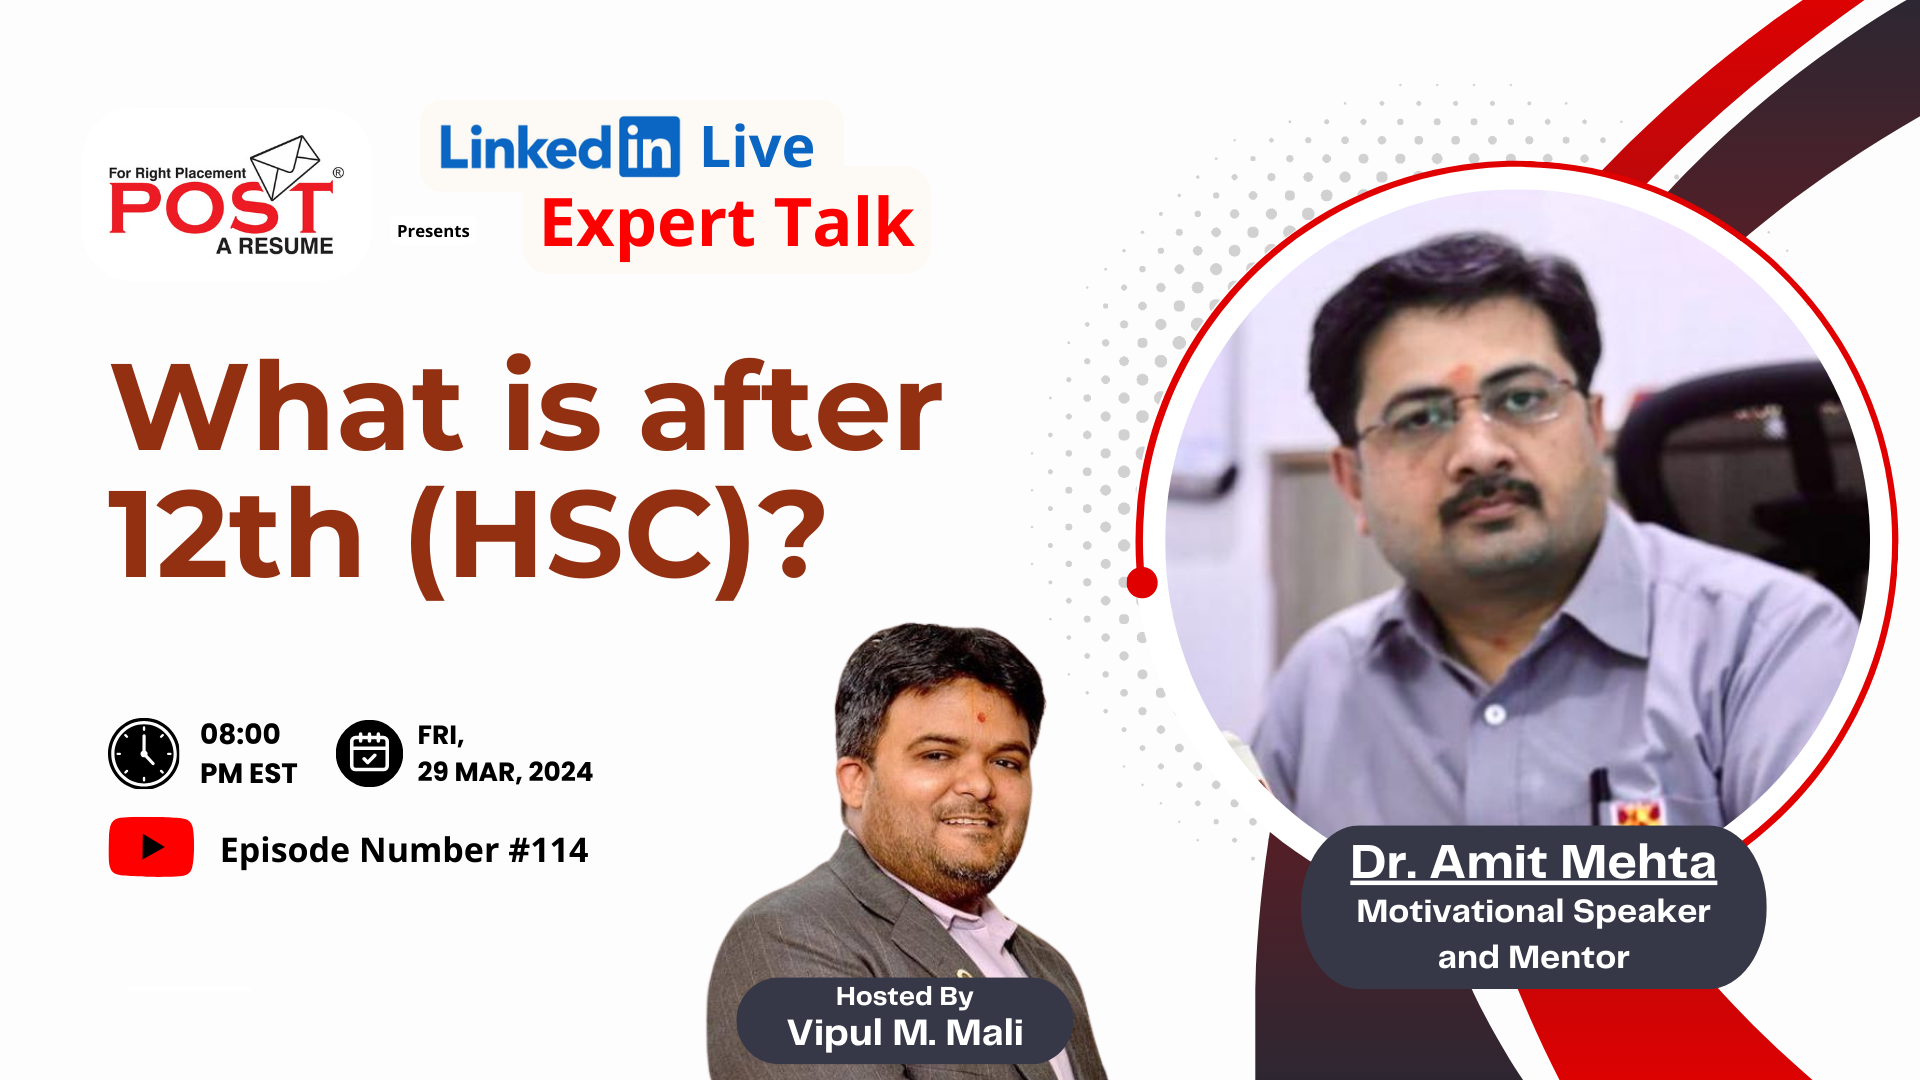 Expert Talk Ep. 114 with Dr. Amit Mehta on What is after 12th (HSC)?